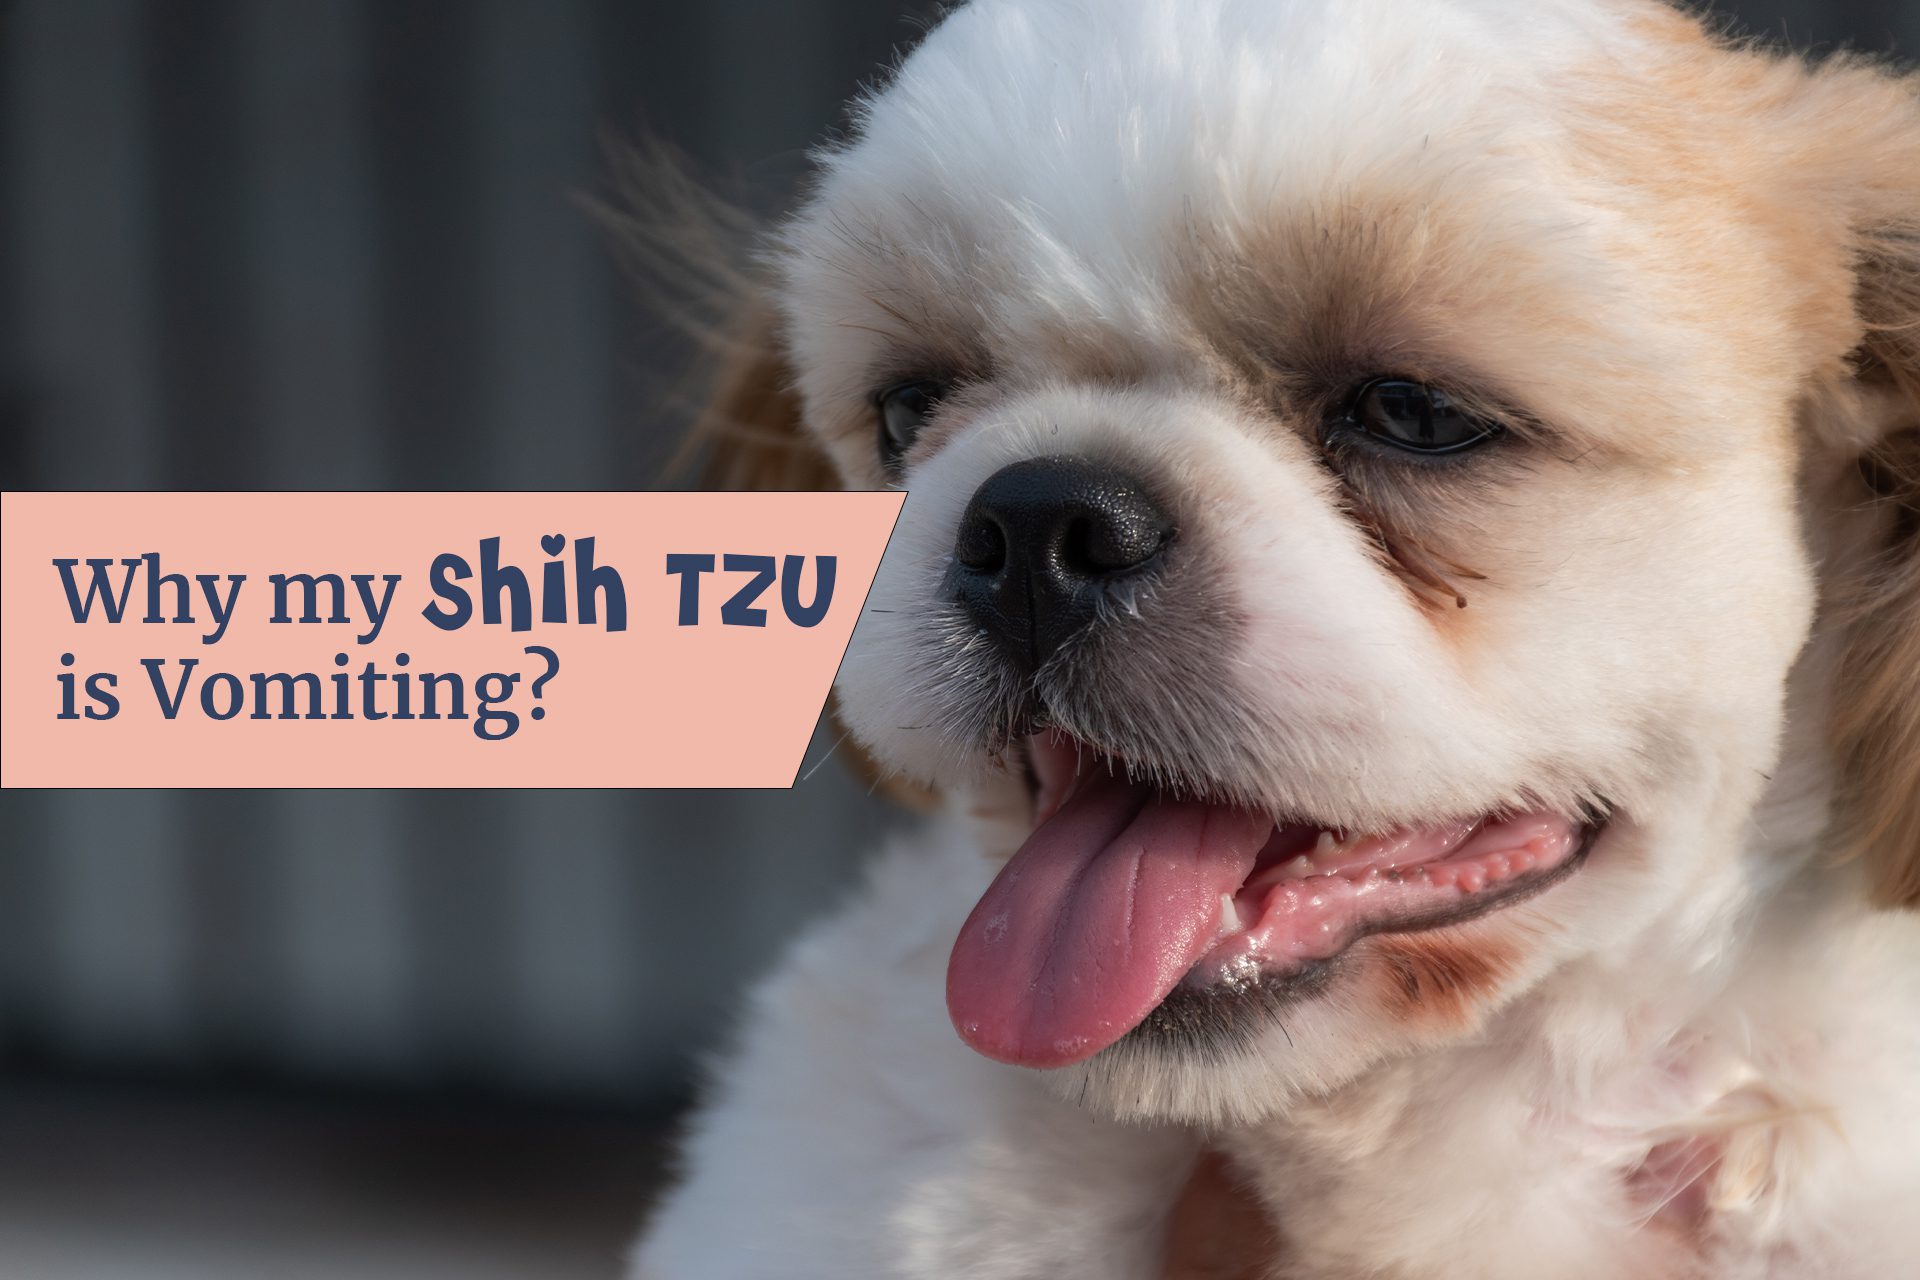 Why my Shih Tzu is vomiting? It is important to identify the cause of vomiting in order to provide the correct treatment.